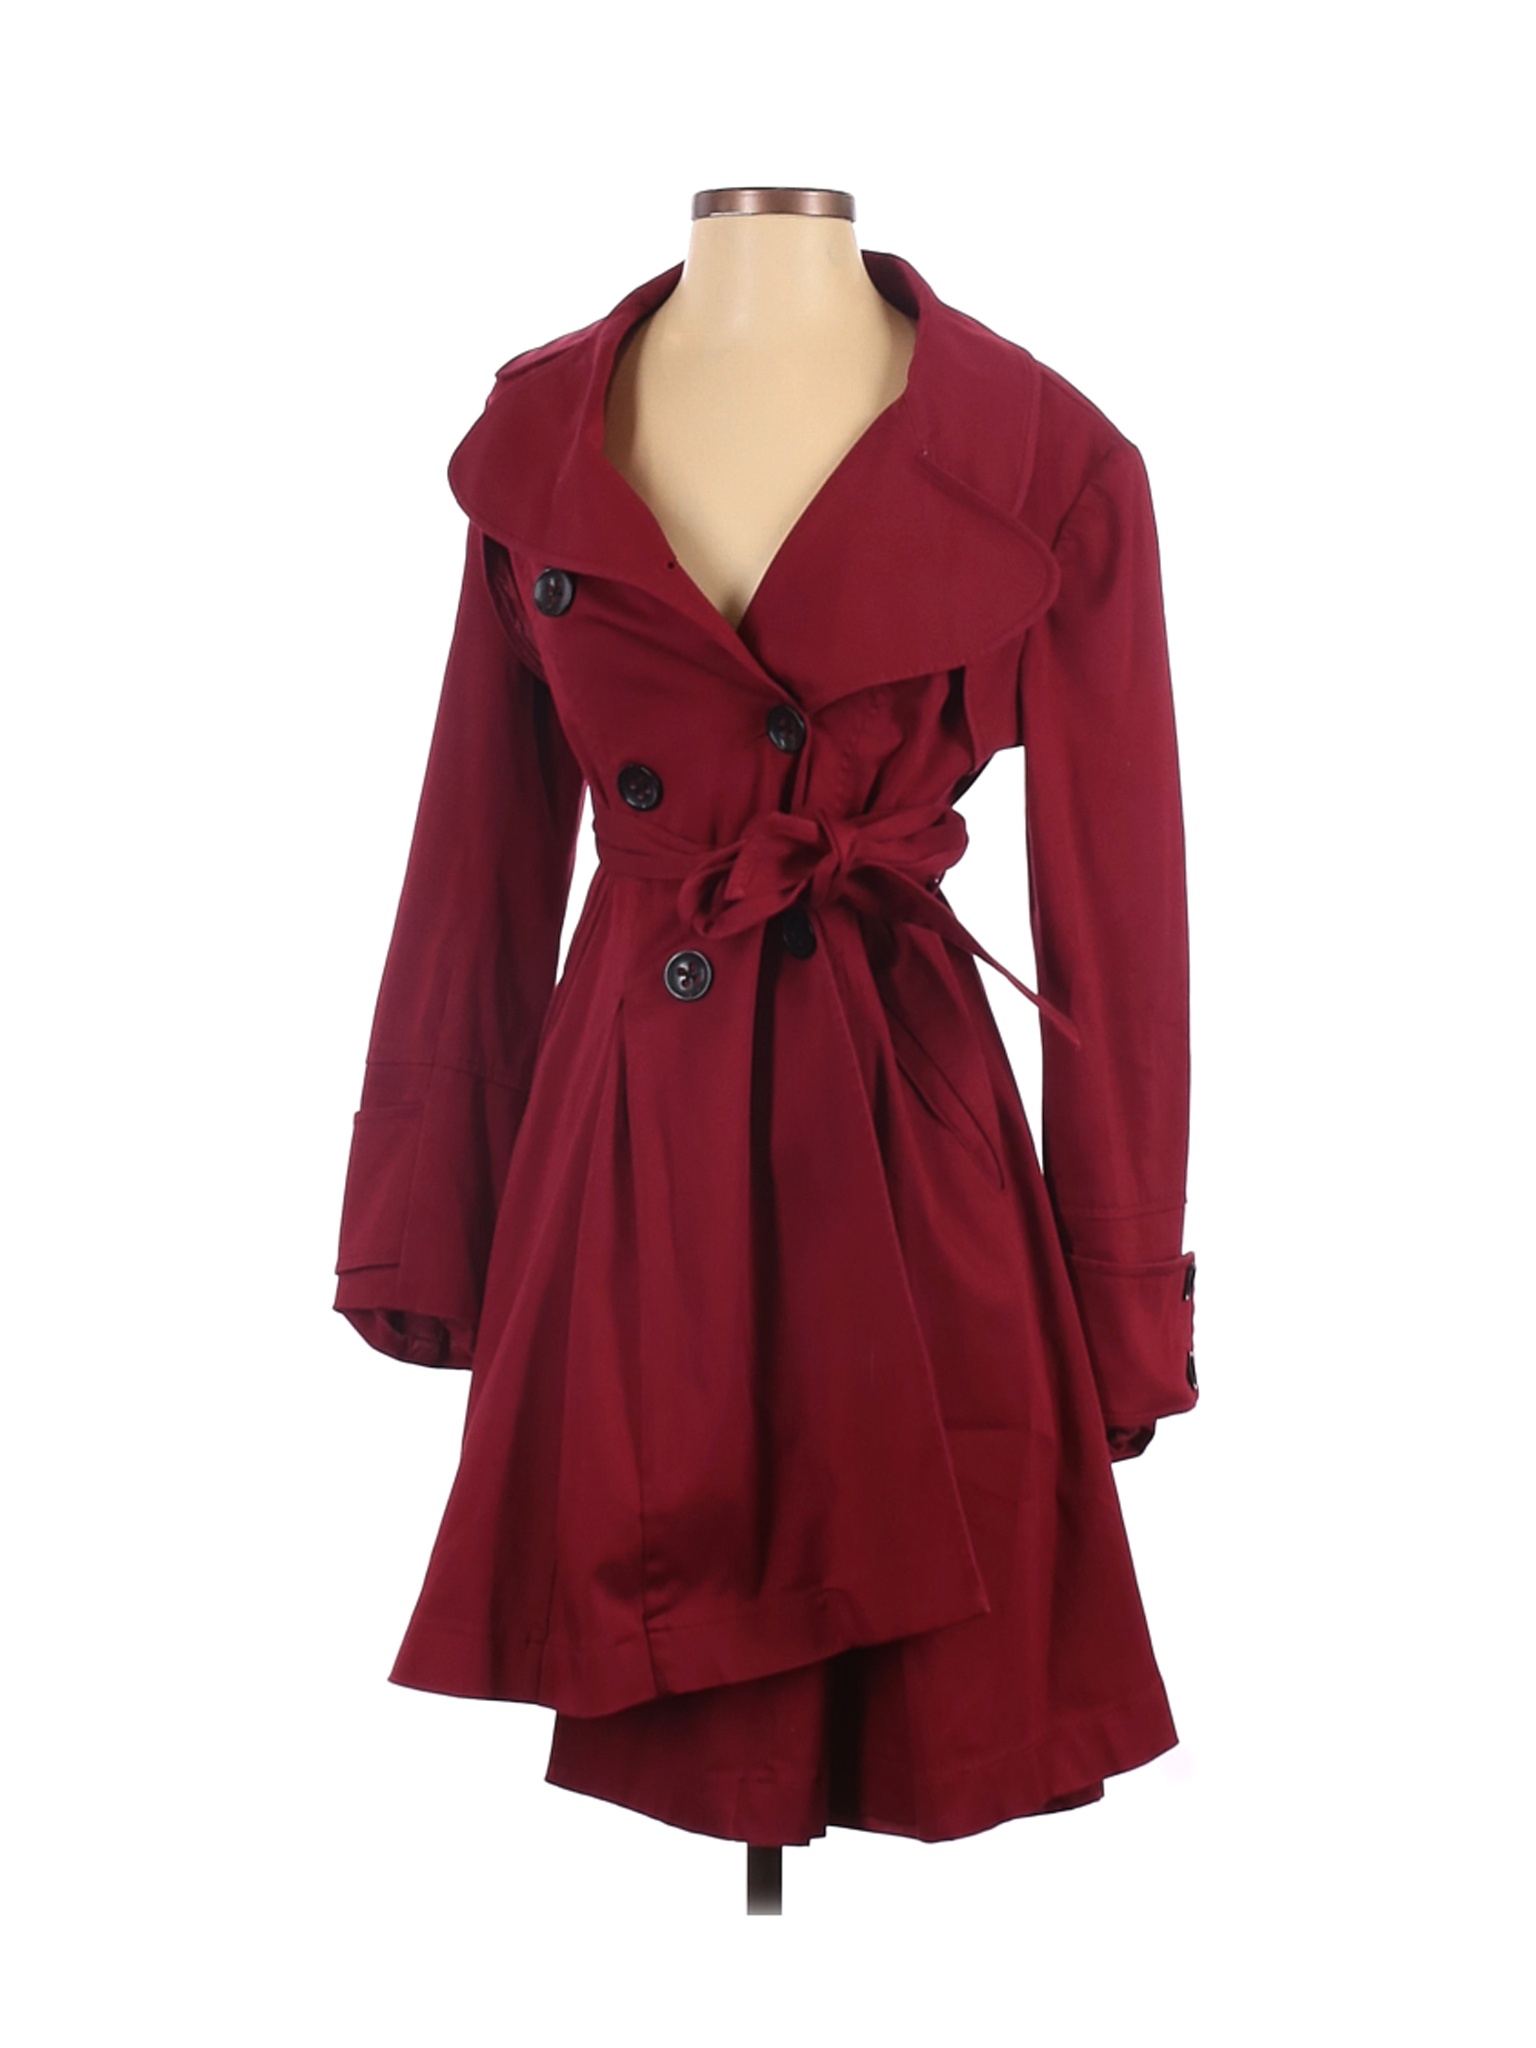 The Limited Women Red Trenchcoat S | eBay